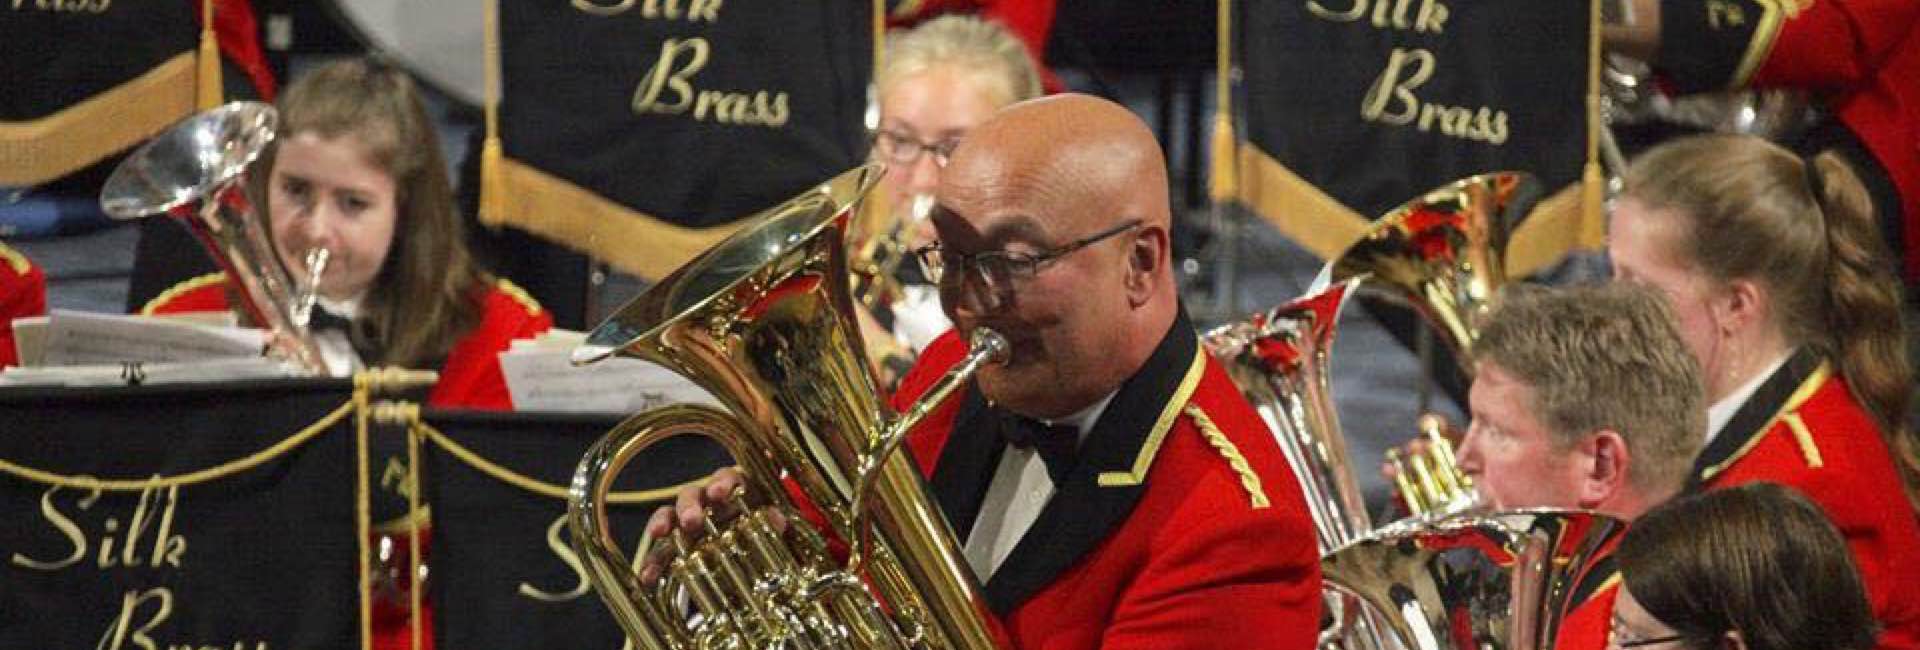 Silk Brass Band. A top class brass band based in Marton, Cheshire